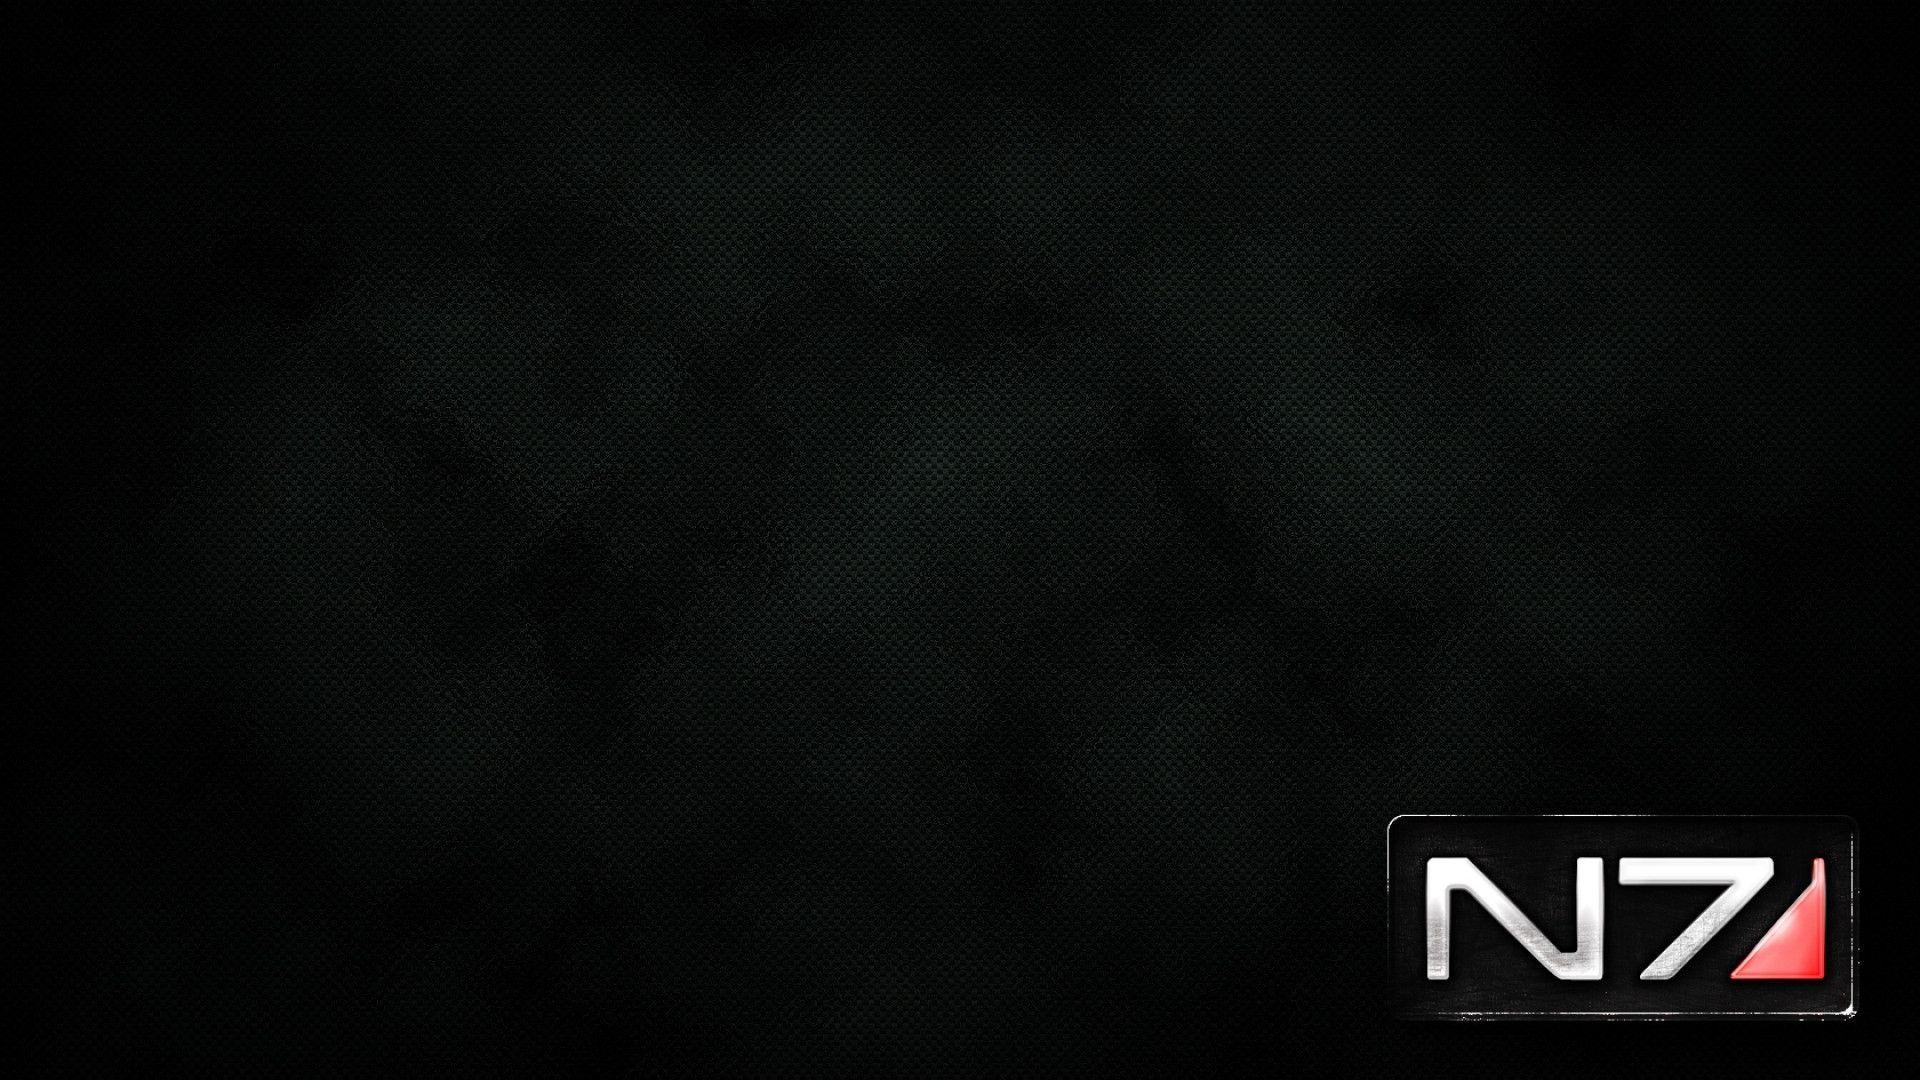 Download Wallpapers 1920x1080 mass effect 3, n7, font, backgrounds